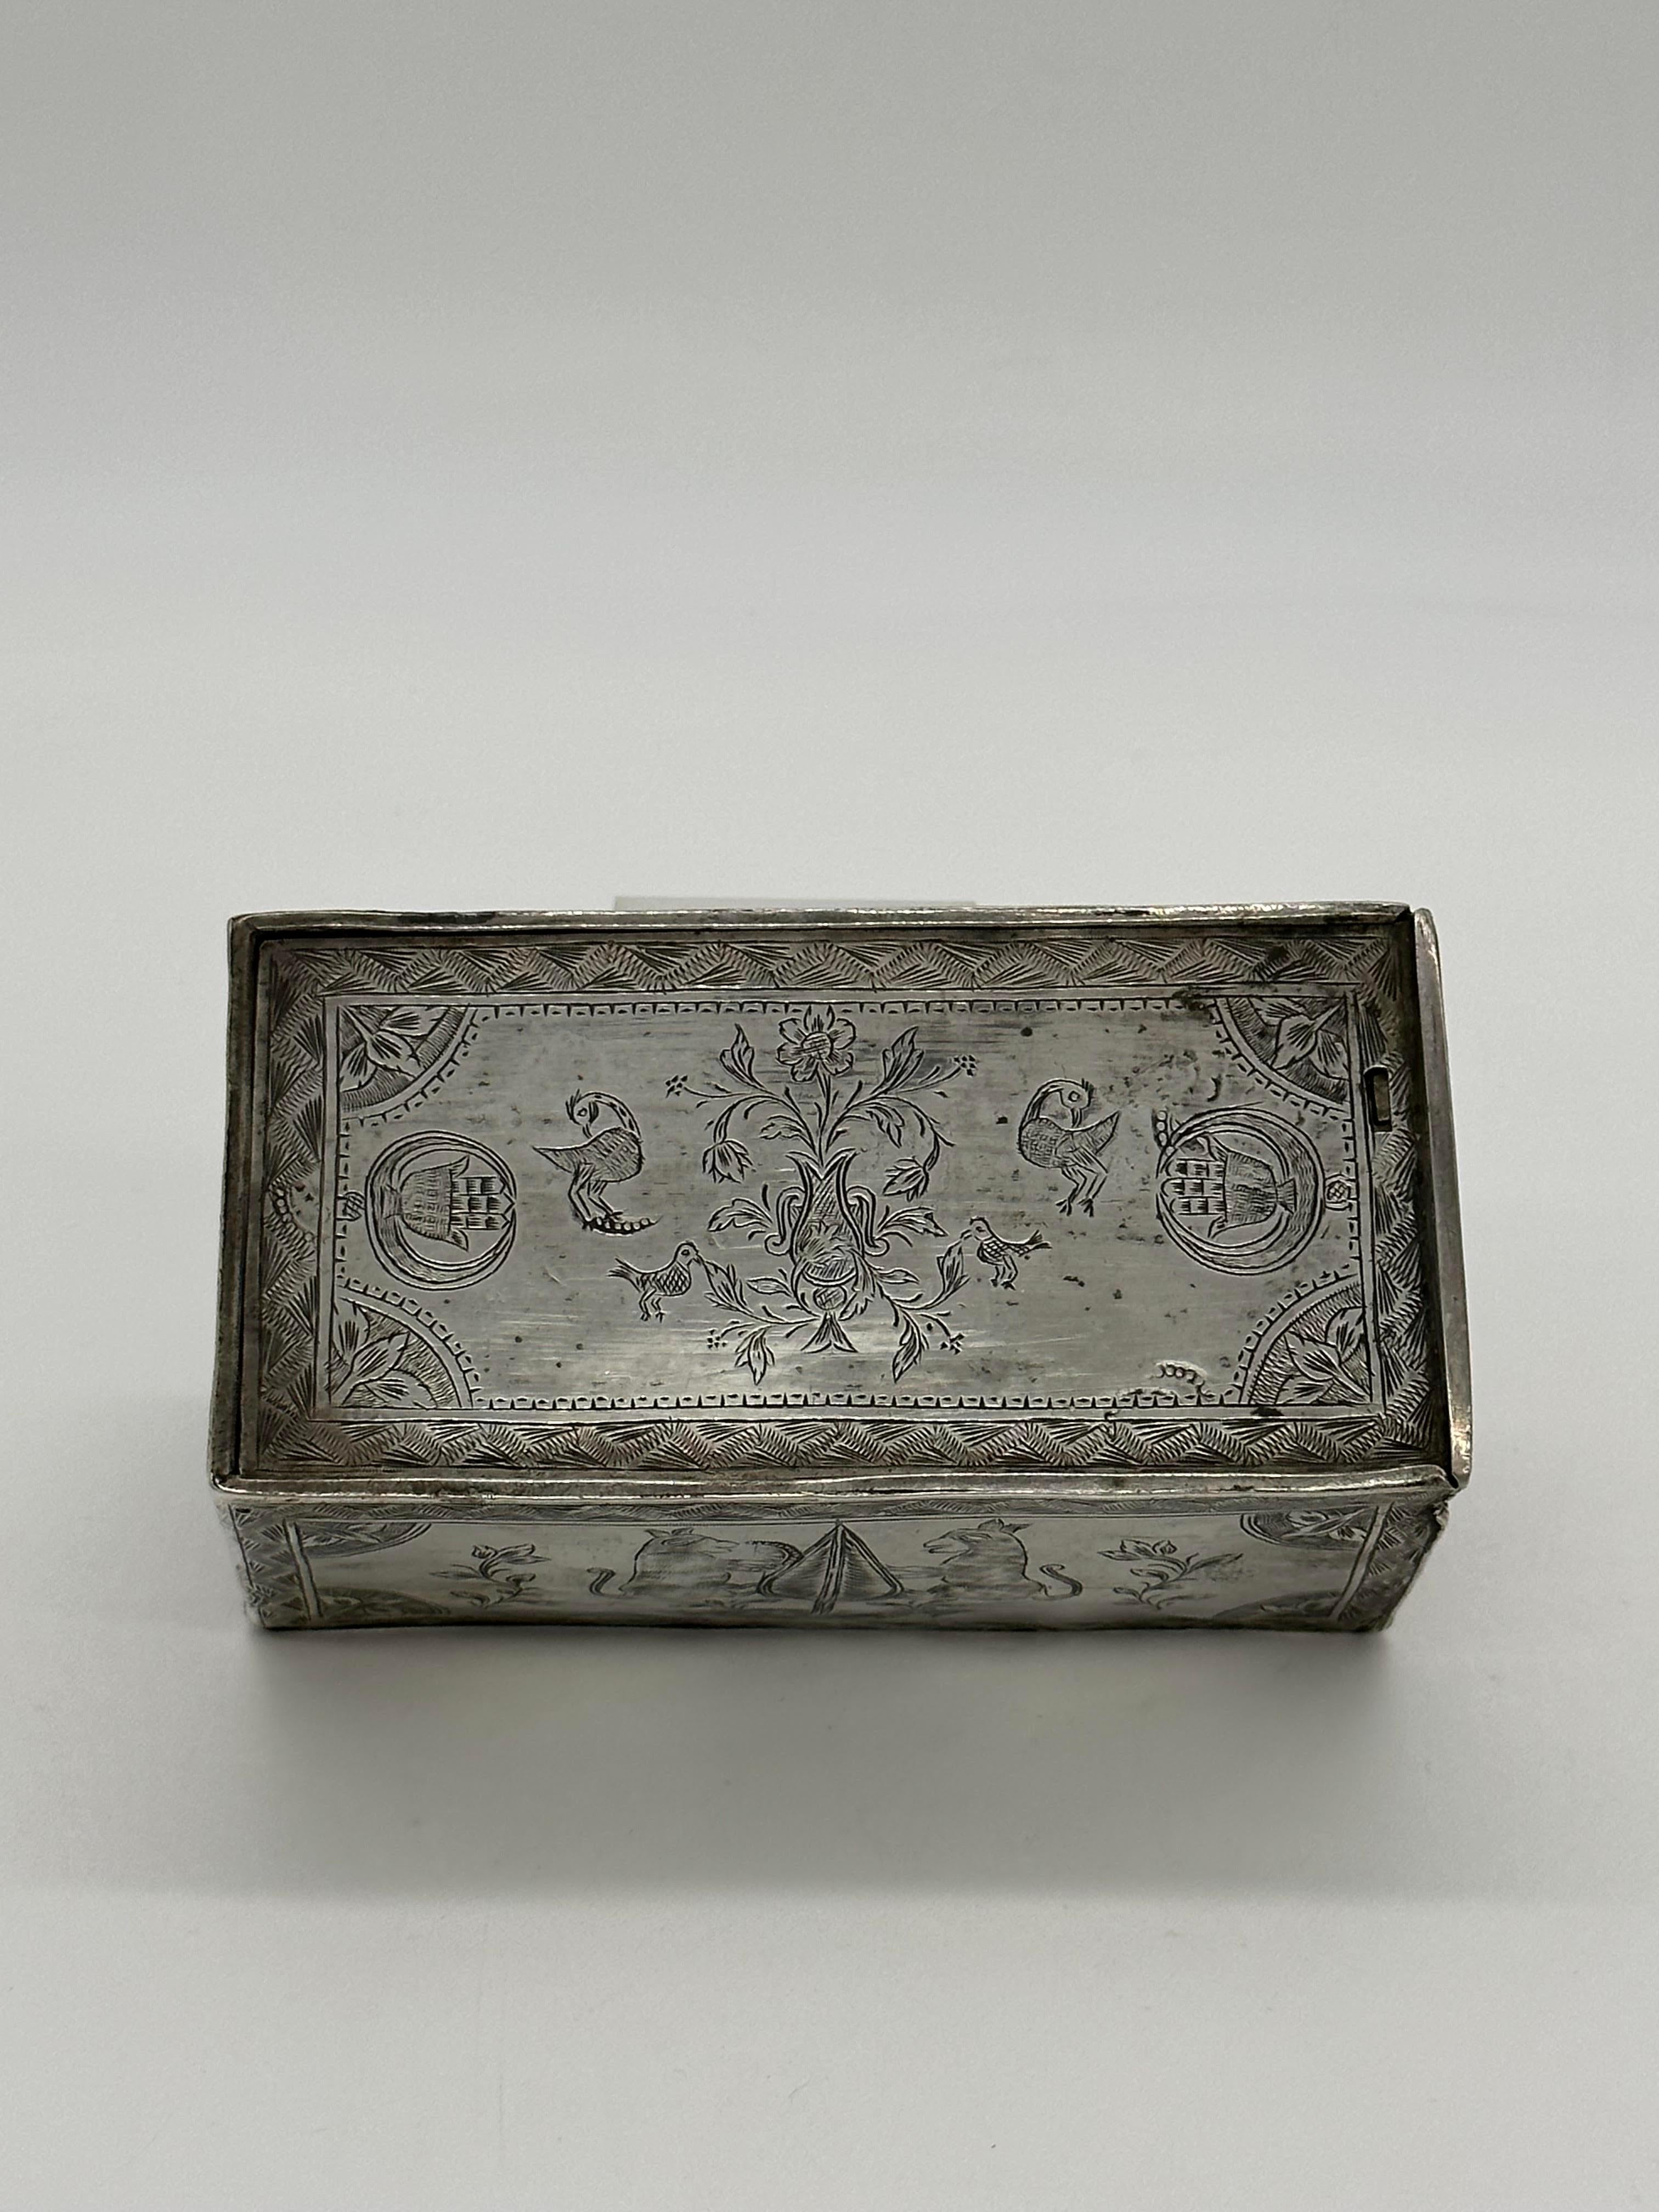 extremely rare Algerian Judaica silver, jewish Dowry box early 19th century For Sale 3